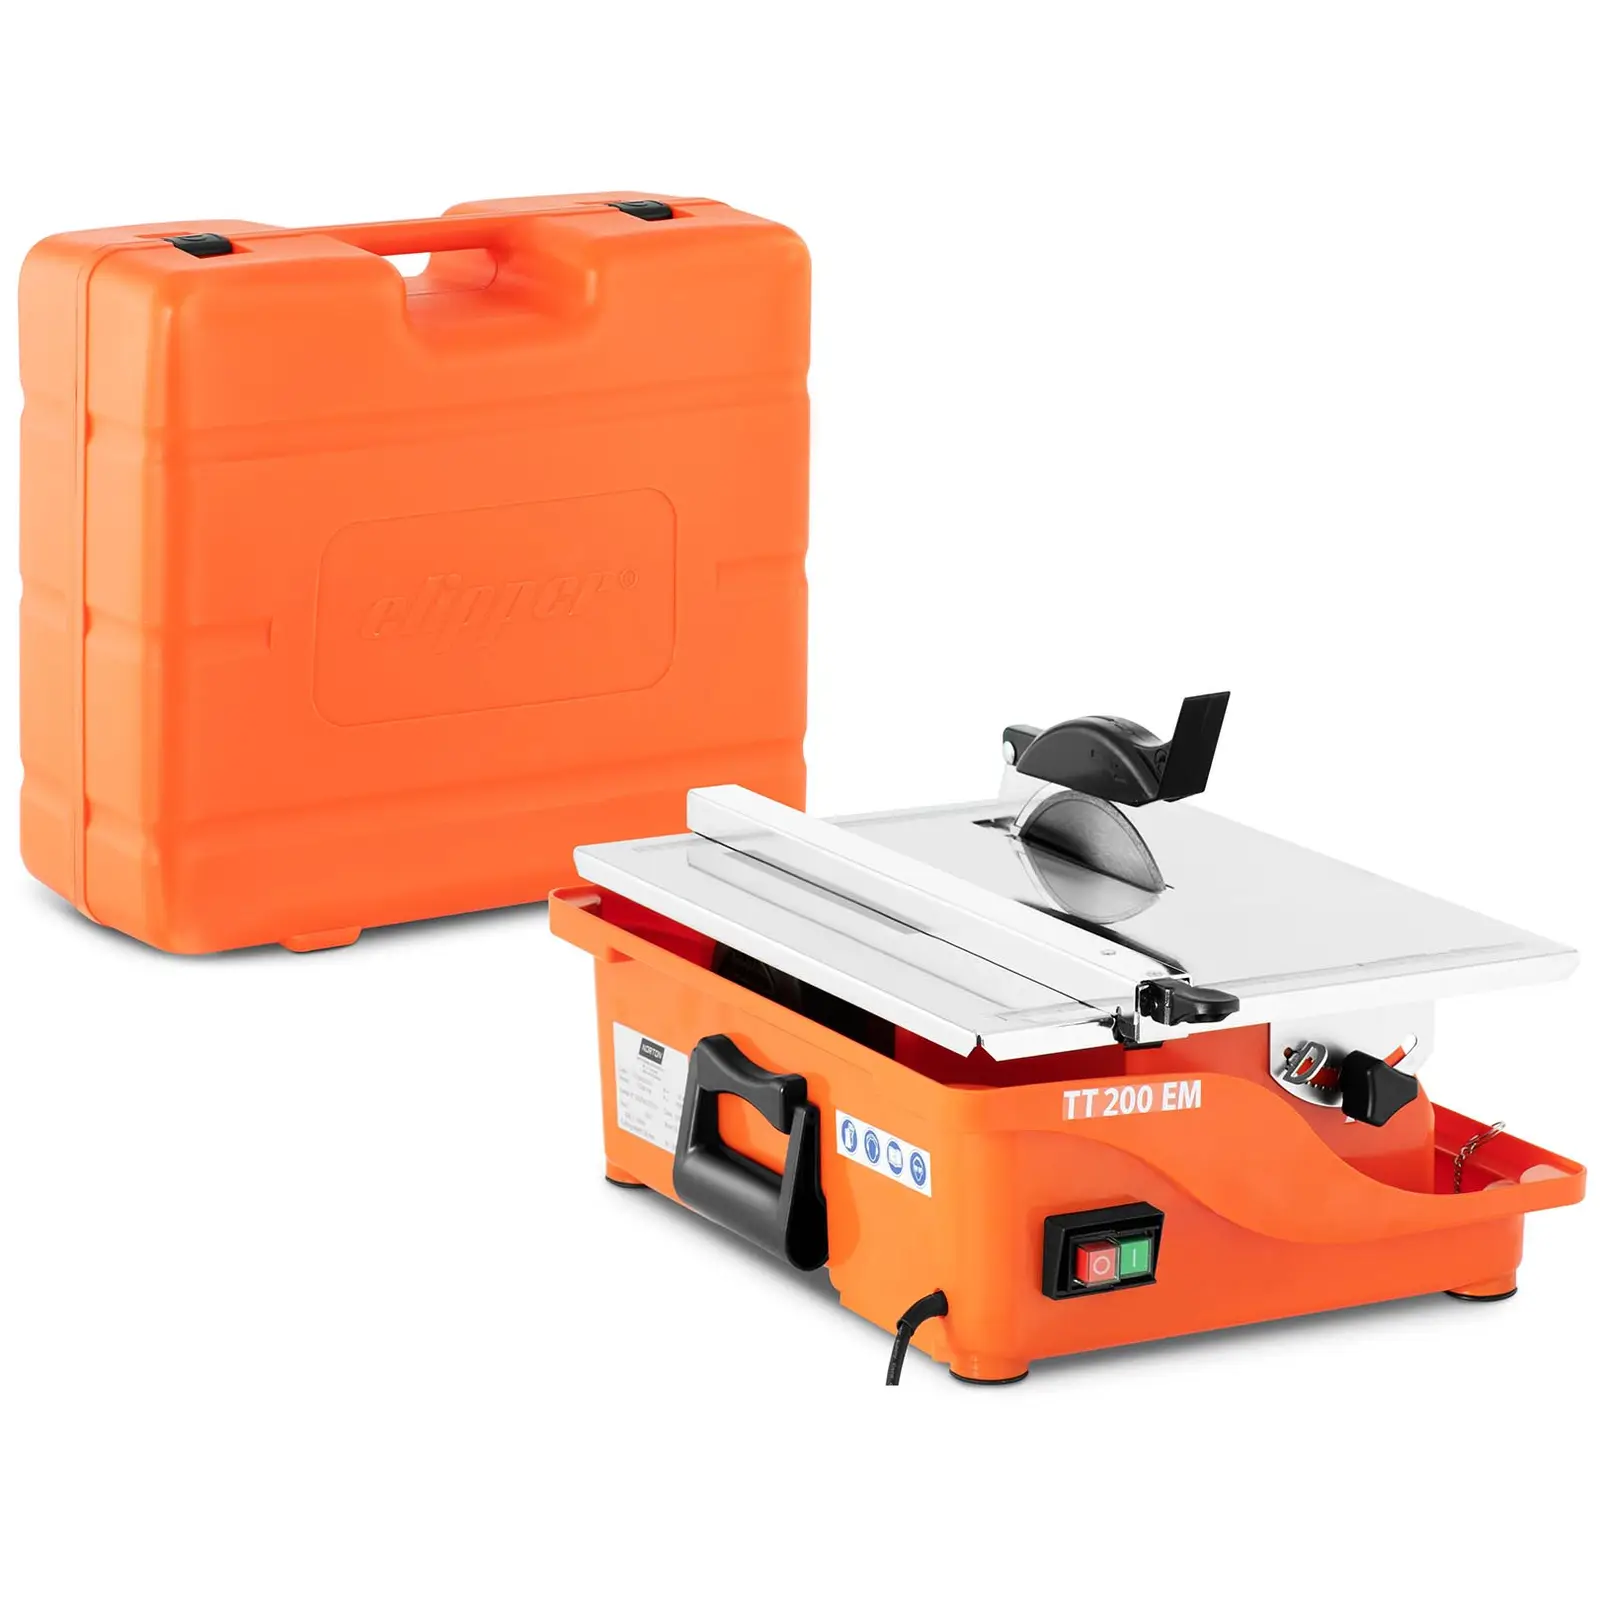 Tile Cutter - 800 W - tiltable stainless steel table from 0 - 45° - water cooling